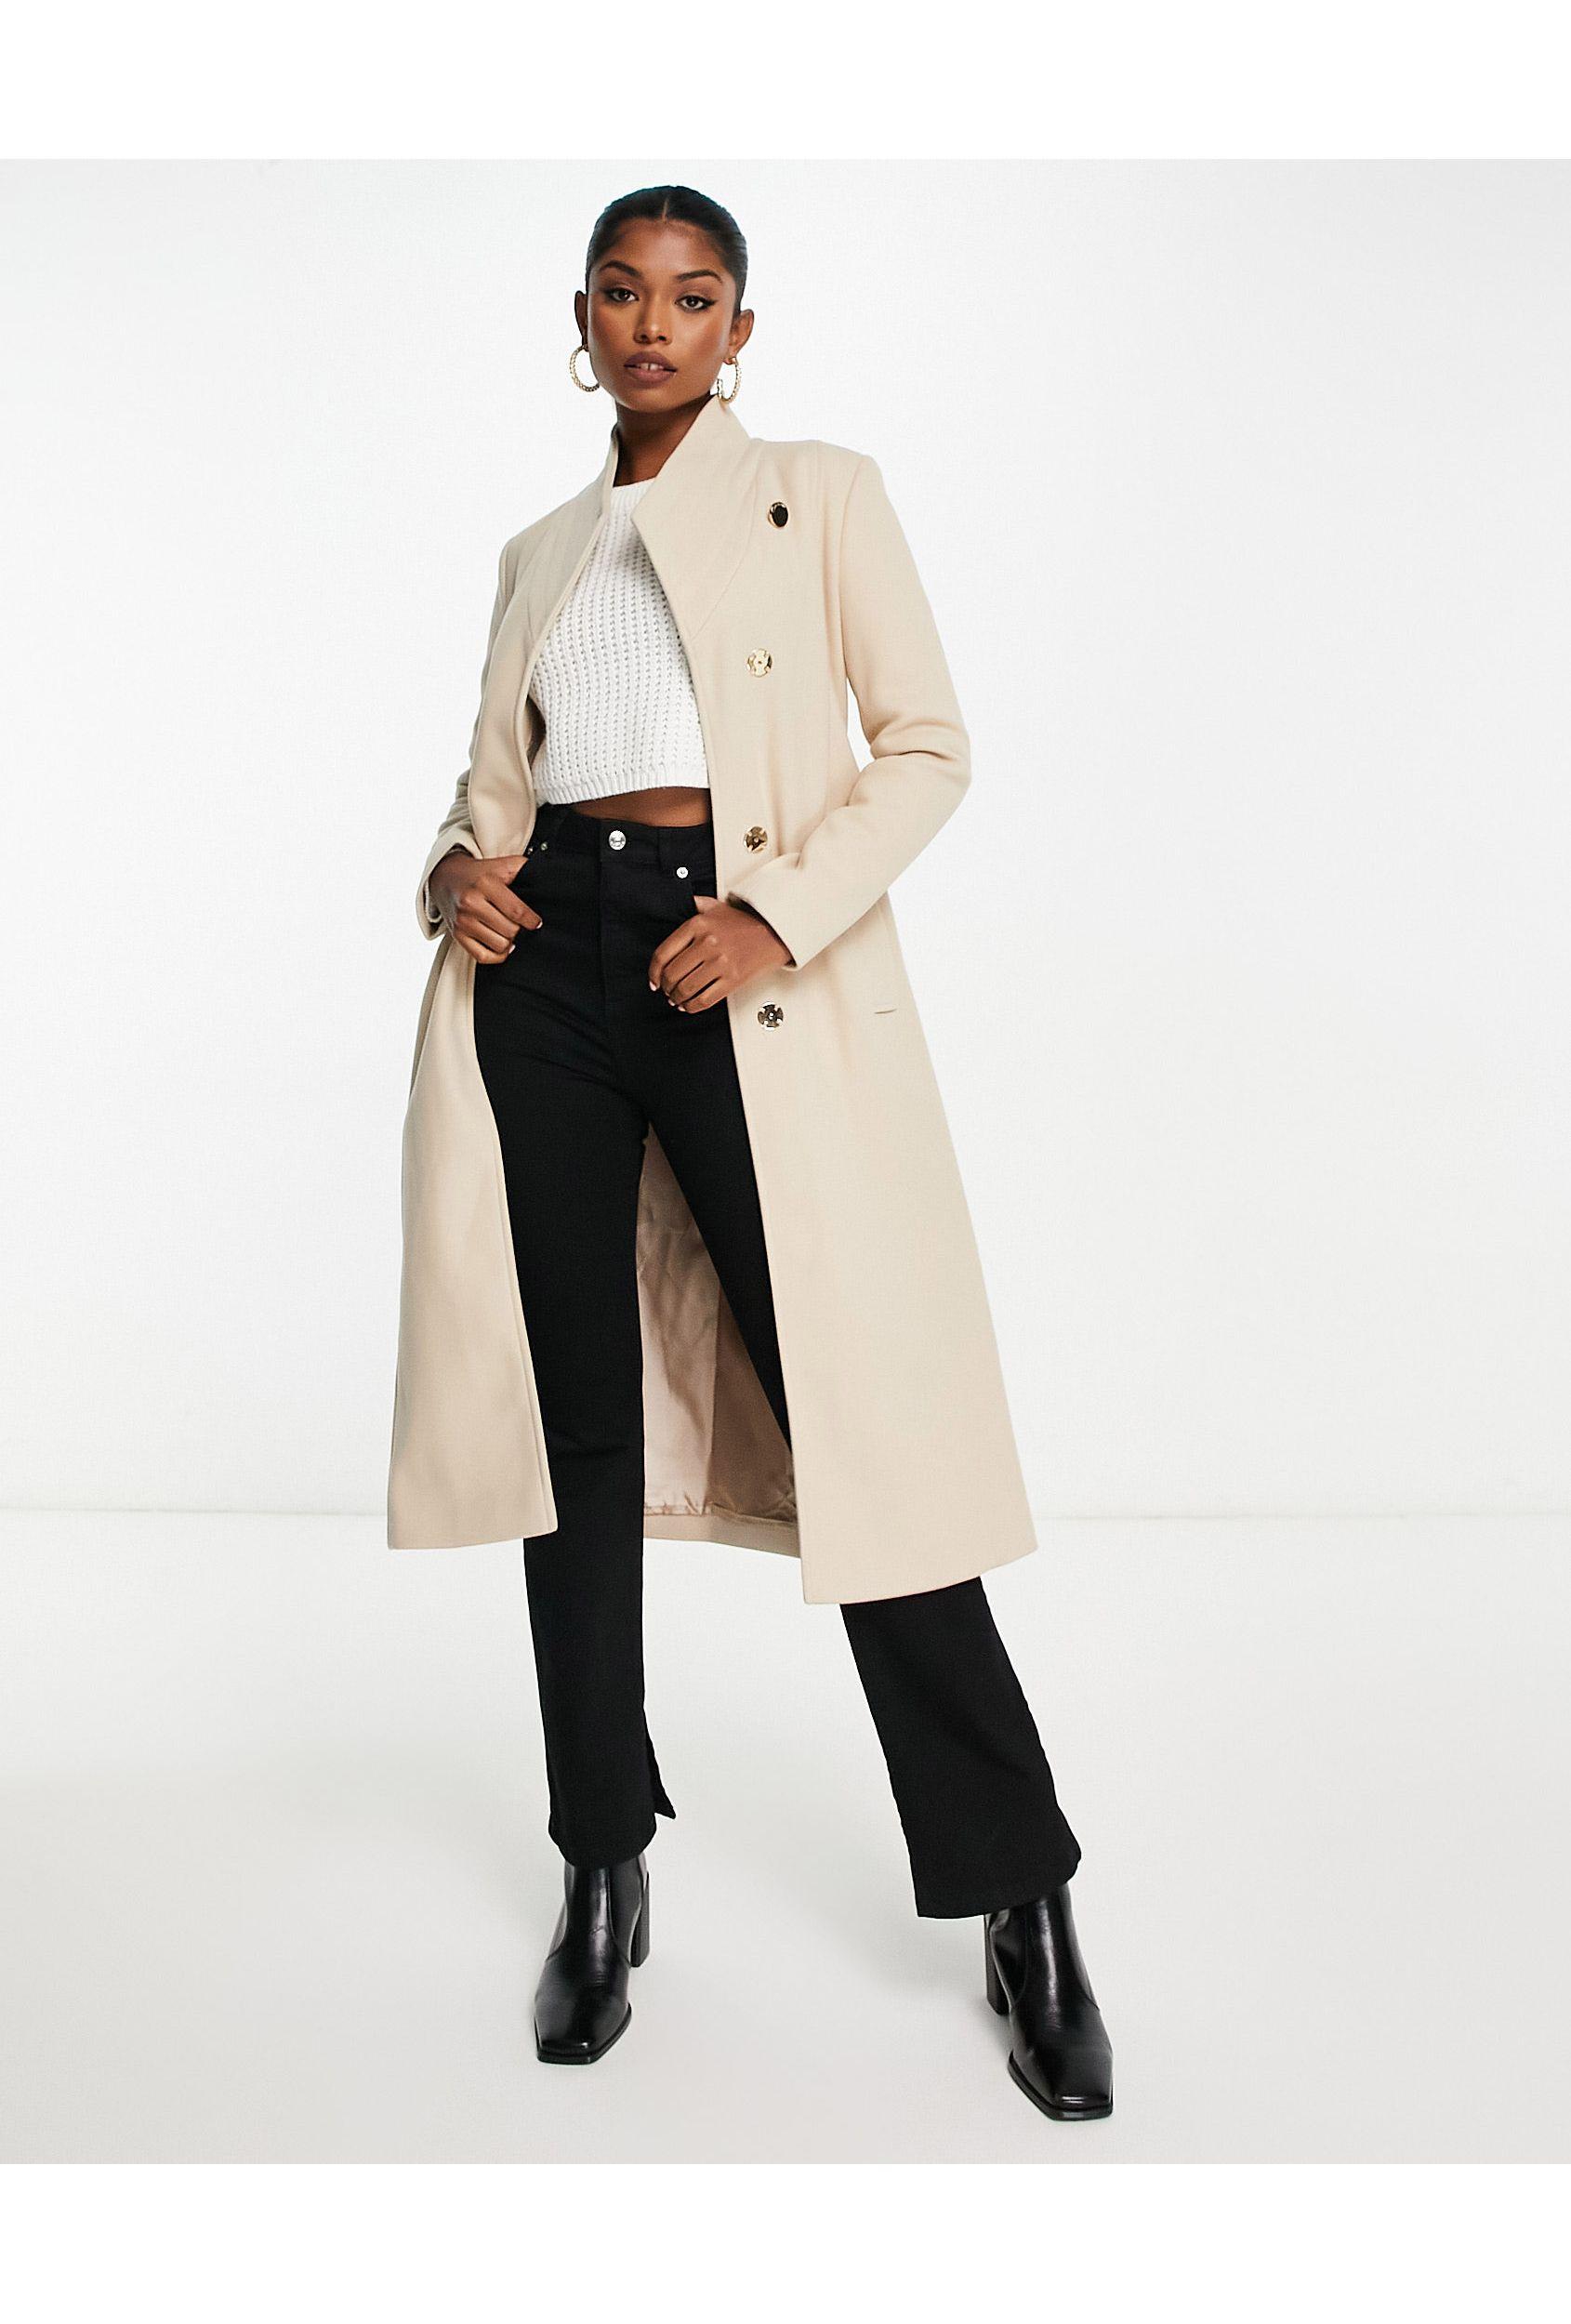 River Island Belted Funnel Neck Tailored Coat in White | Lyst